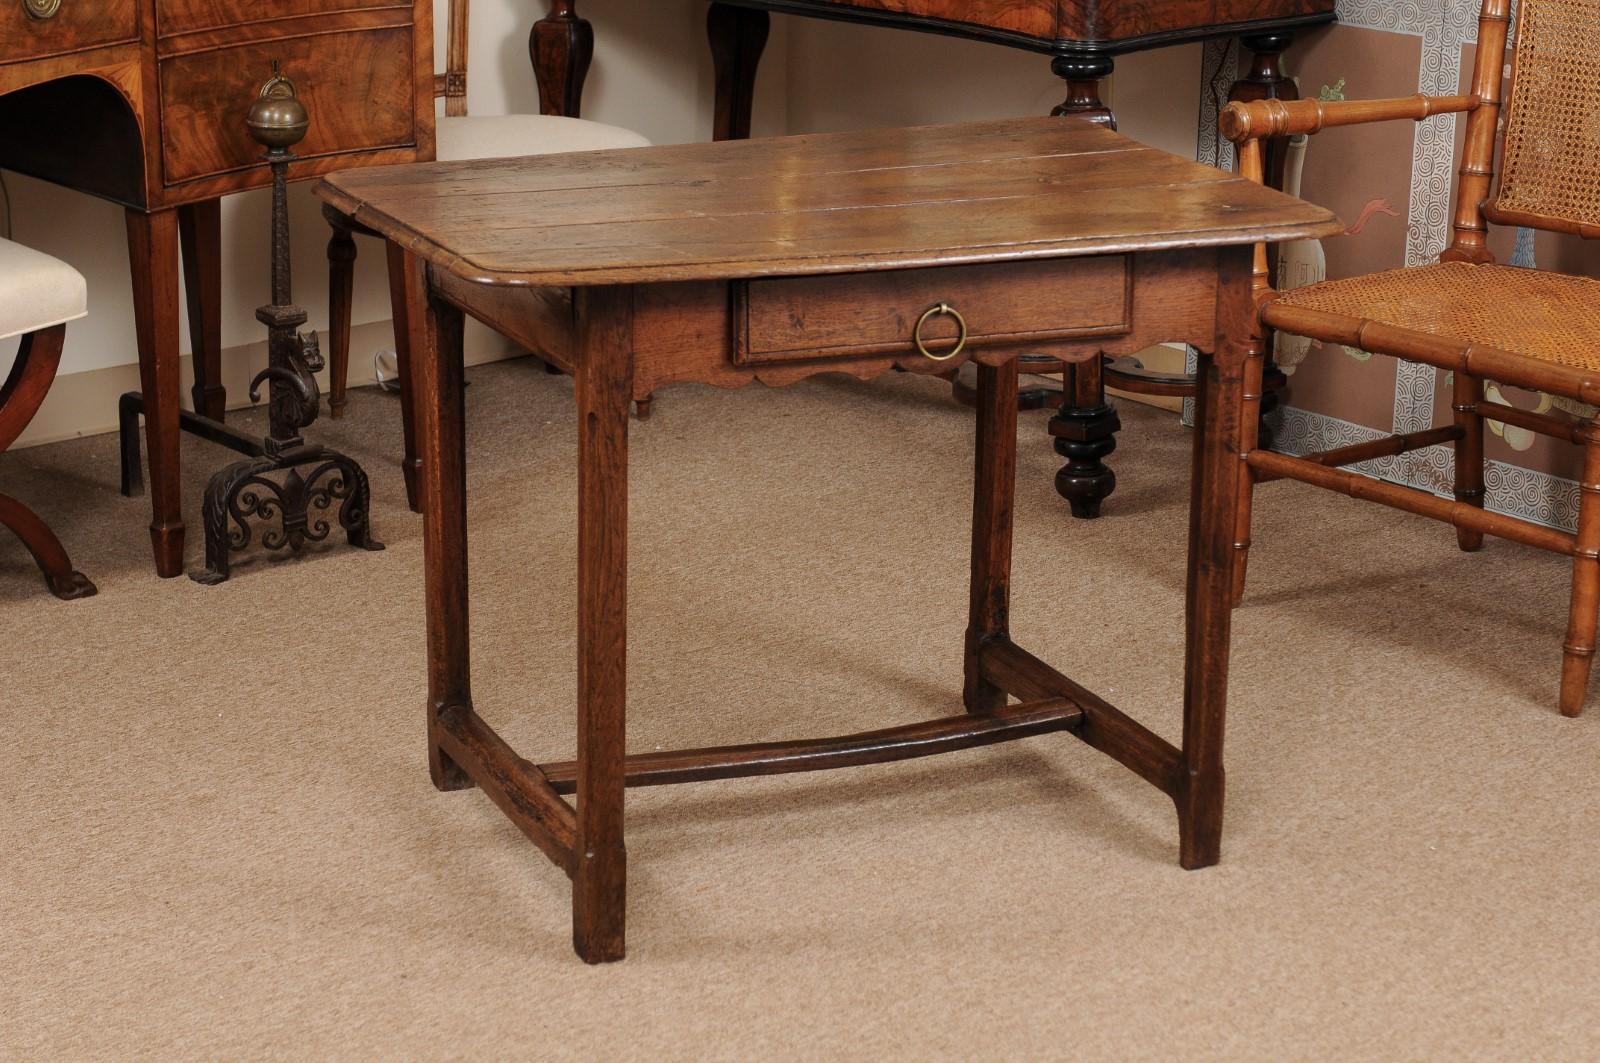 The early 18th century French oak side table with 3-piece rectangular top with molded edge, drawer below and carved shaped apron ending in square legs joined with stretcher.